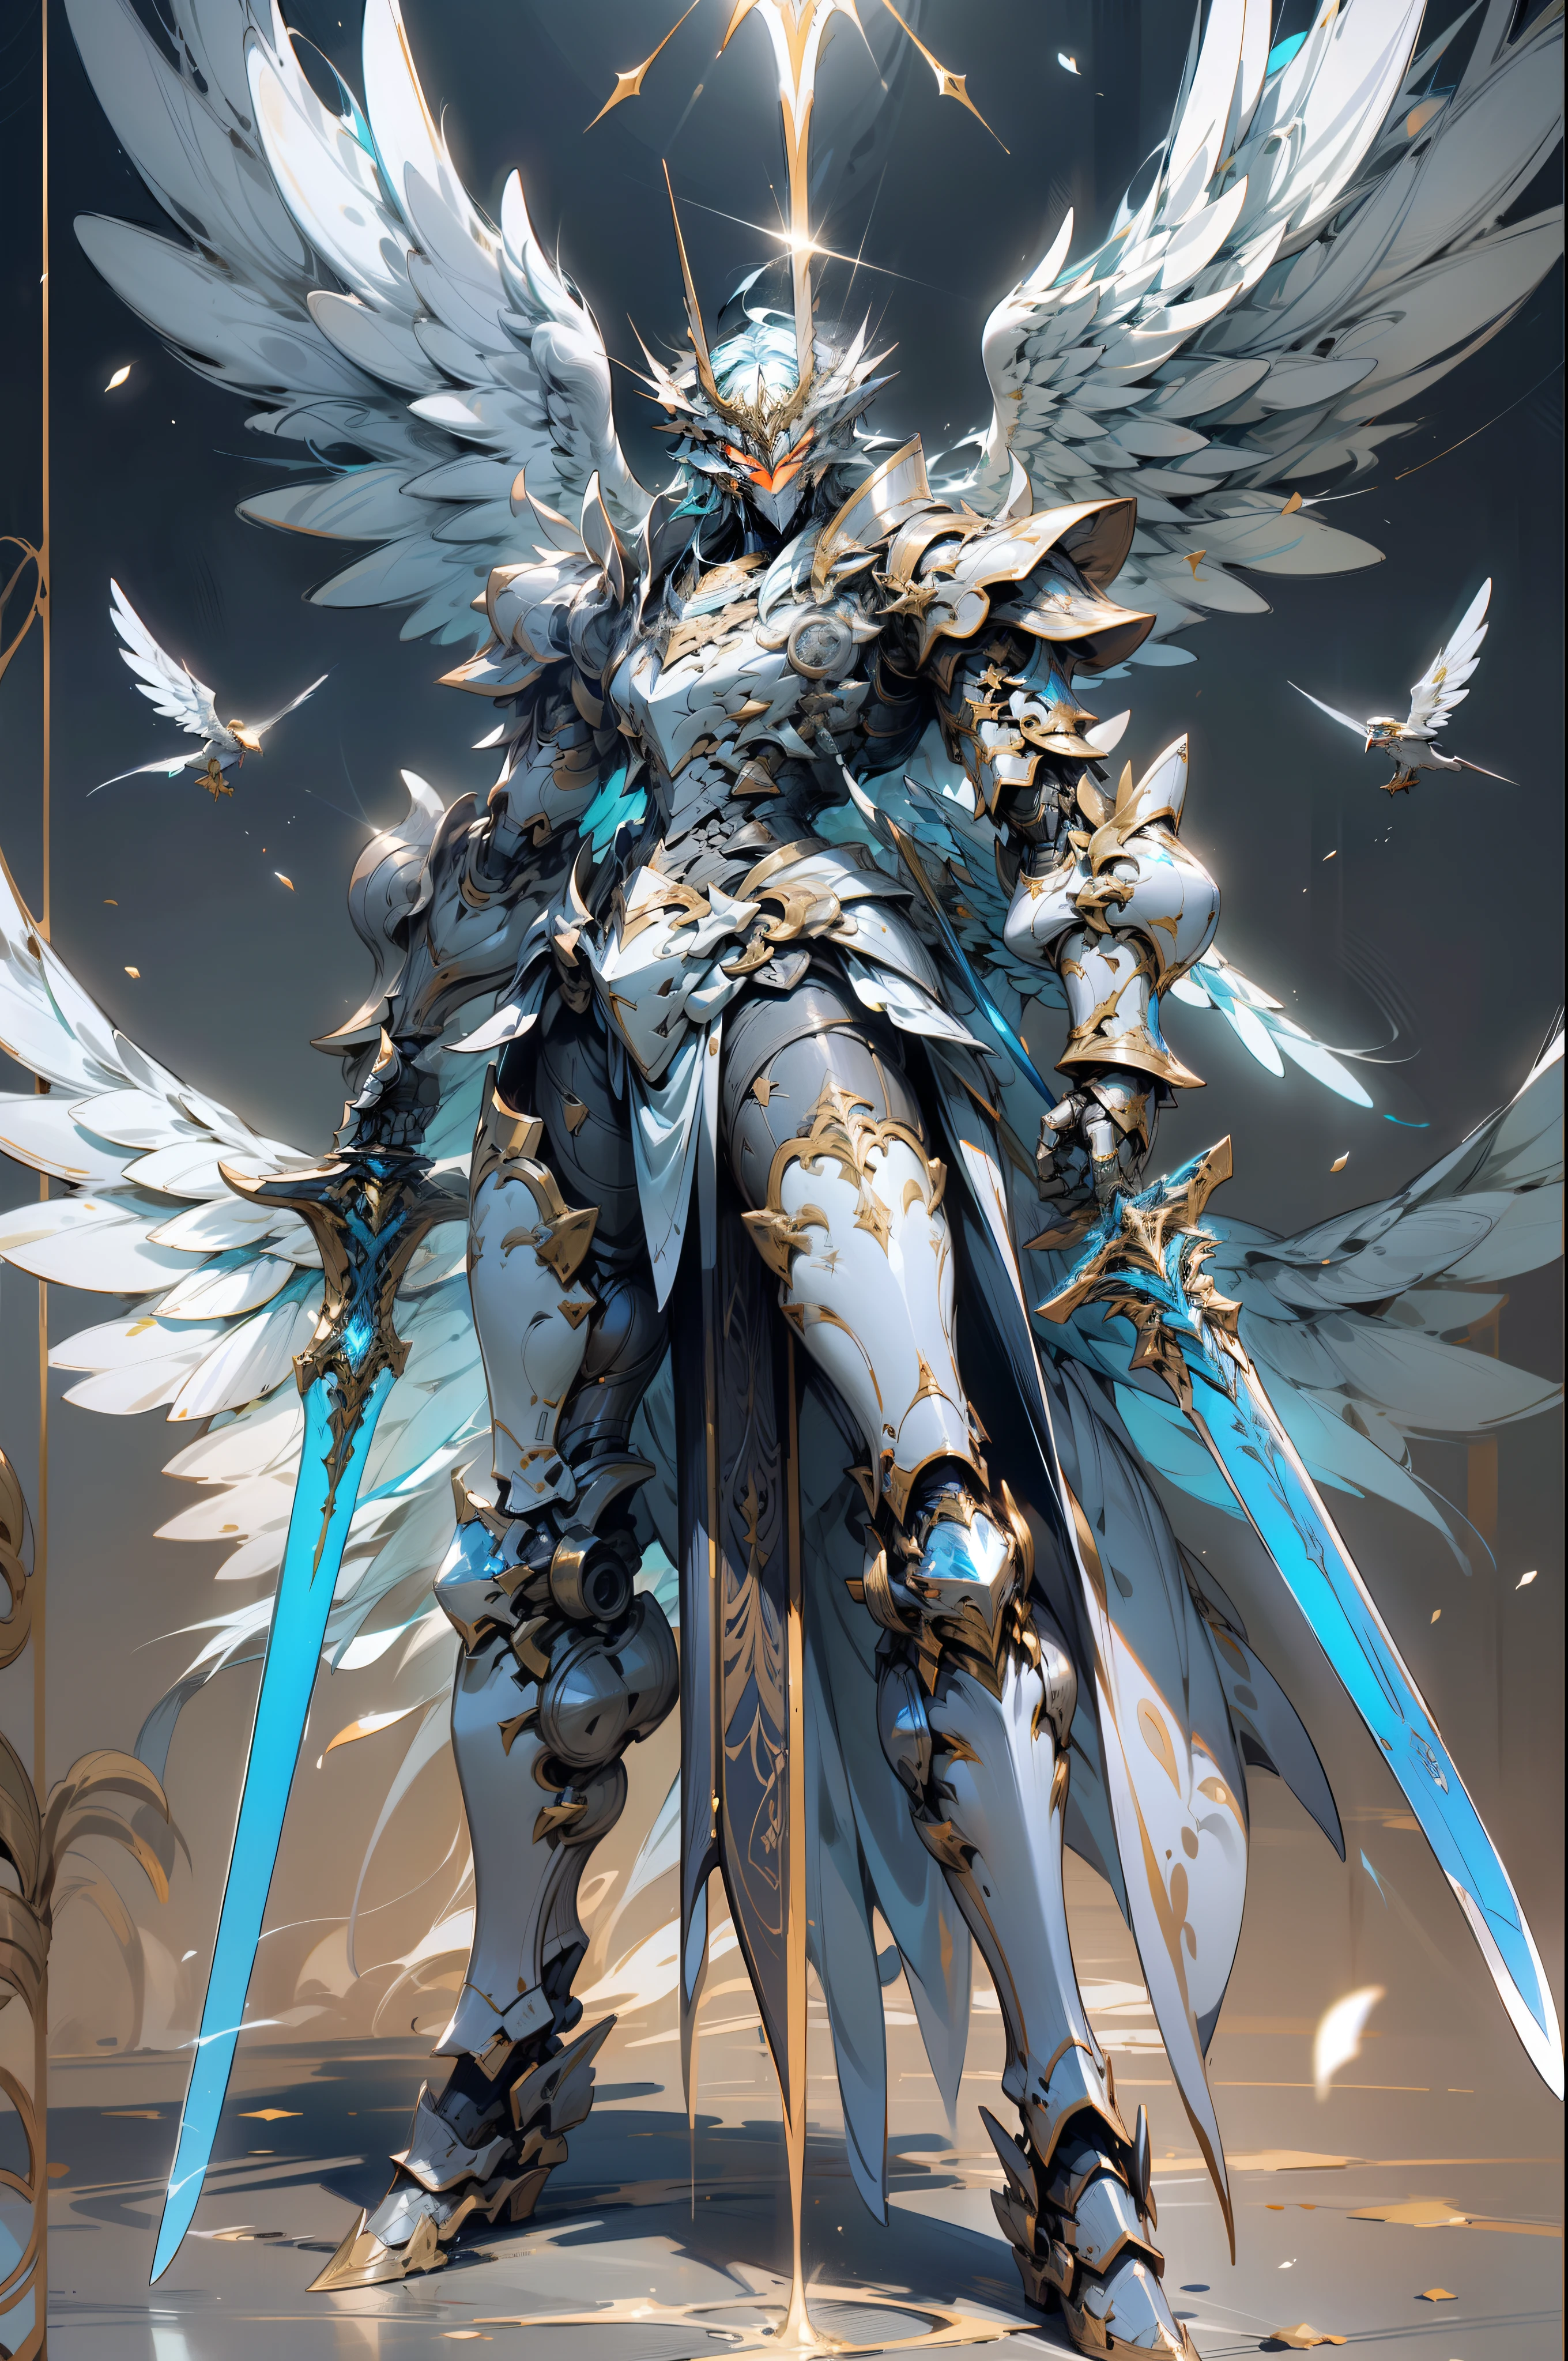 Arad image of a robot with wings and holding a glowing blue elegant symmetrical sword, from Ark Night, Armor Angel with Wings, Ark Night, glossy white armor, Archangel, Alexander Fira white mech, Raymond Swanland style, white armor, albedo of anime overlord, gunnier, detailed white armor, mecha wings